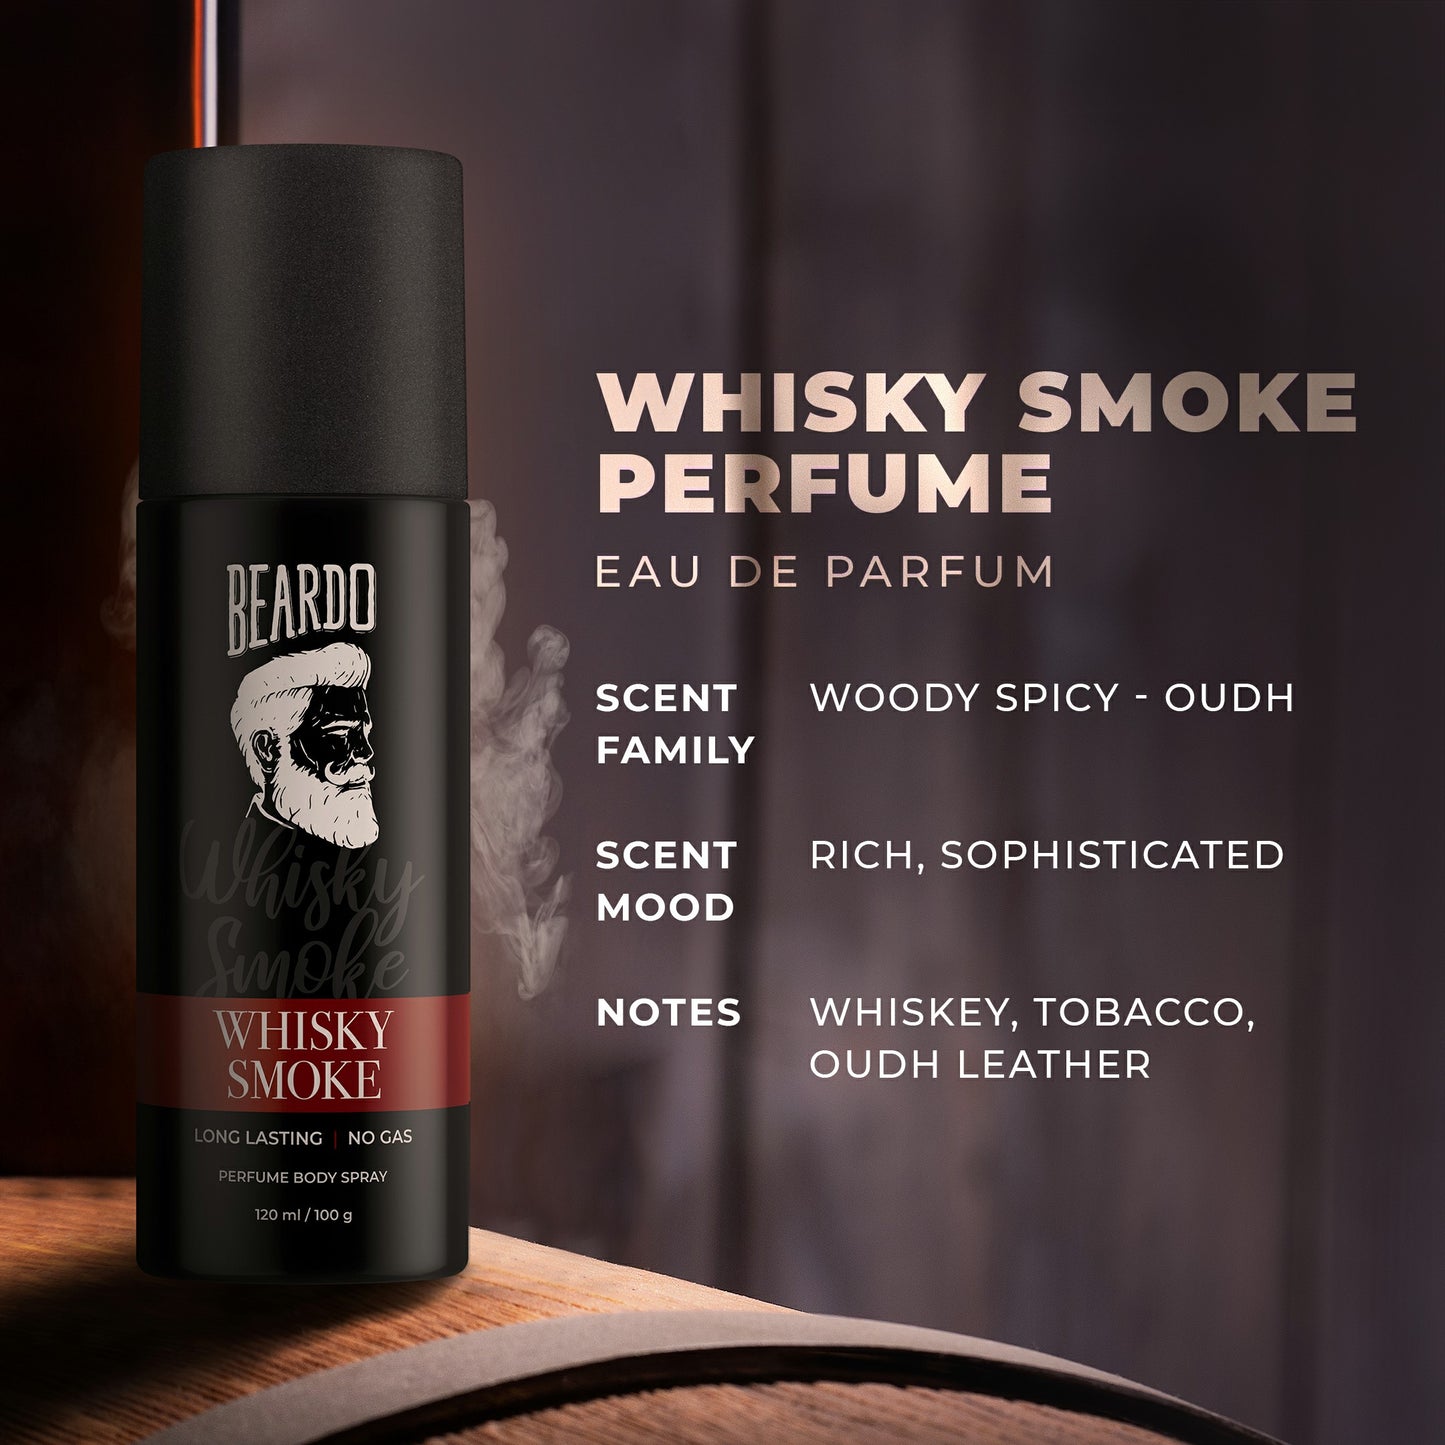 woody spicy notes, woody fragrance, oudh, whiskey, rich fragrance